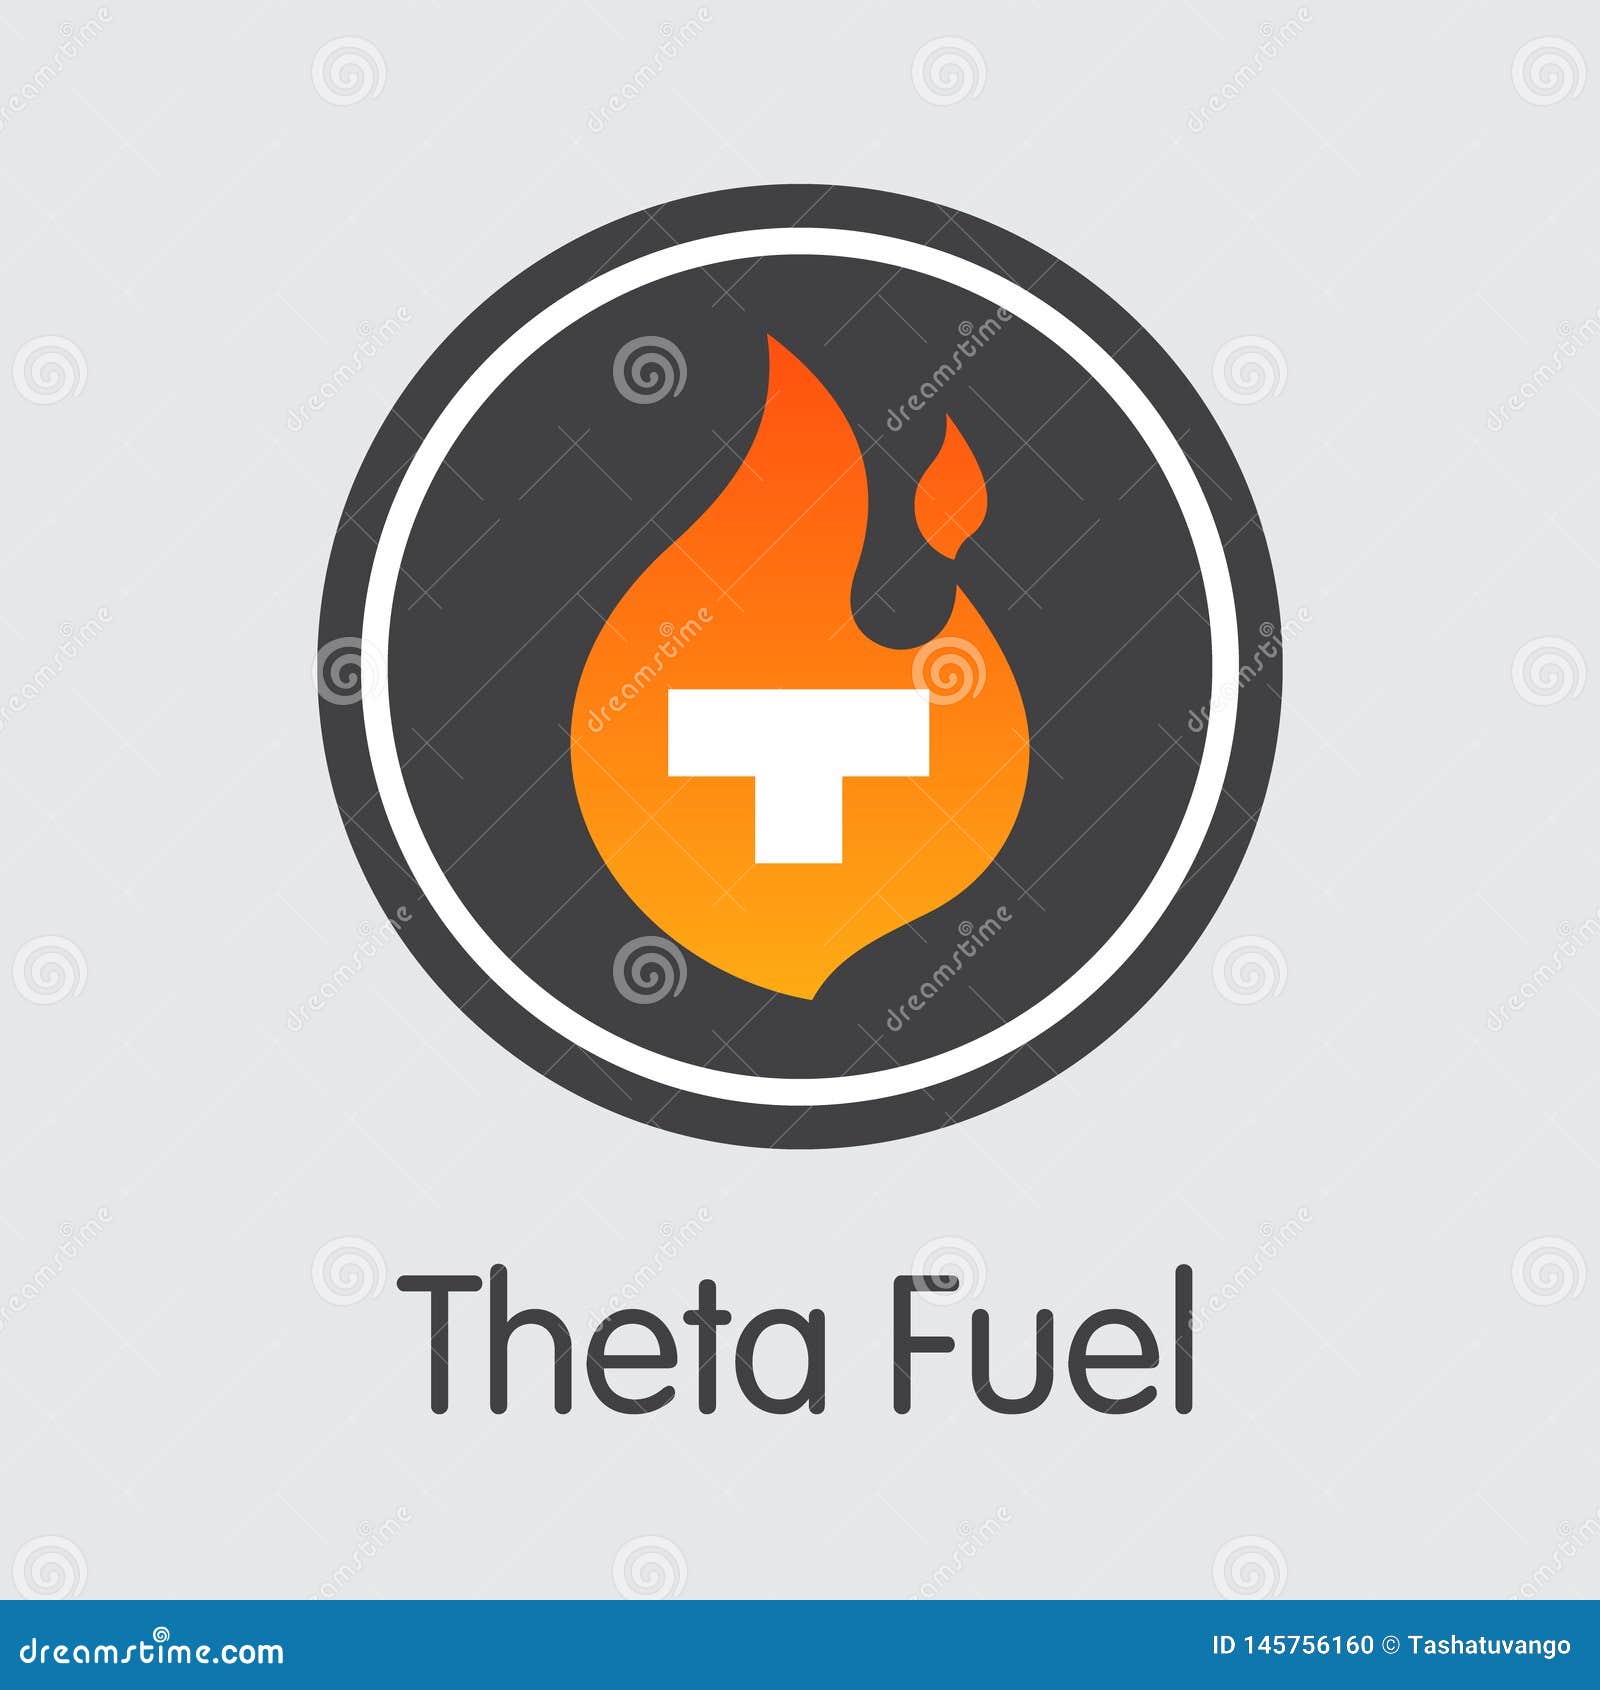 Theta Fuel (TFUEL) - Technical Analysis - Cryptocurrency - Investtech